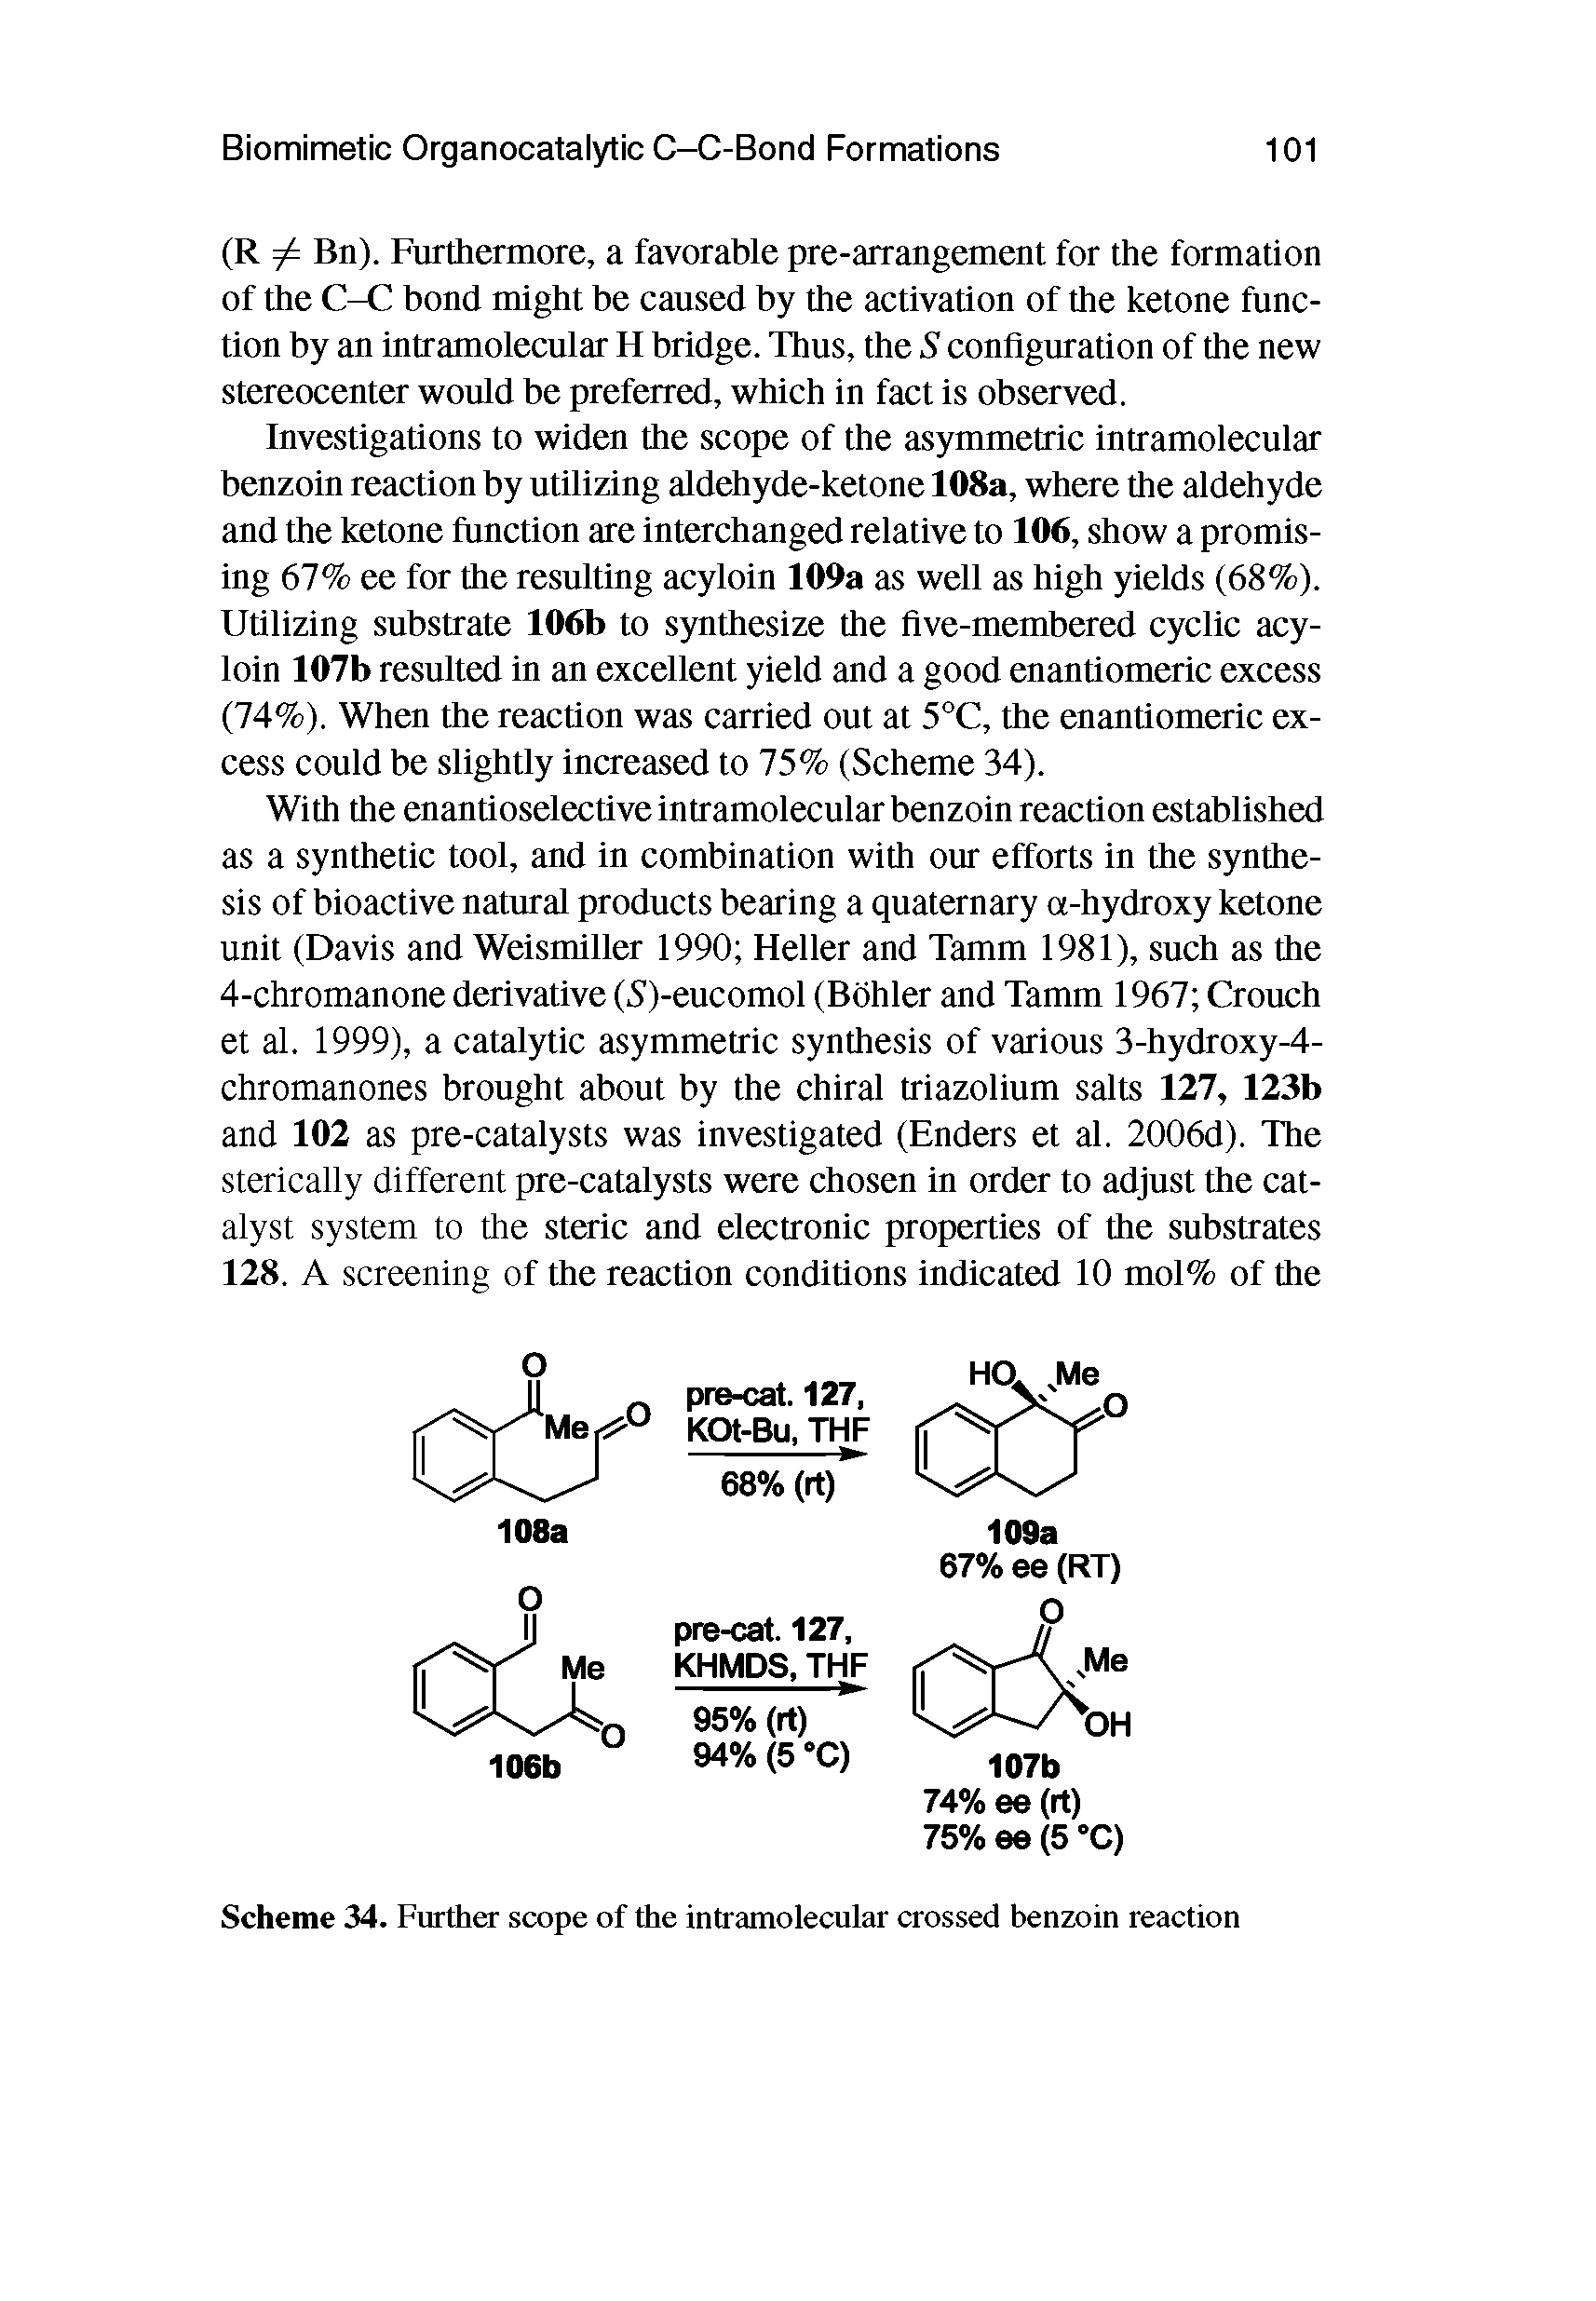 Scheme 34. Further scope of the intramolecular crossed benzoin reaction...